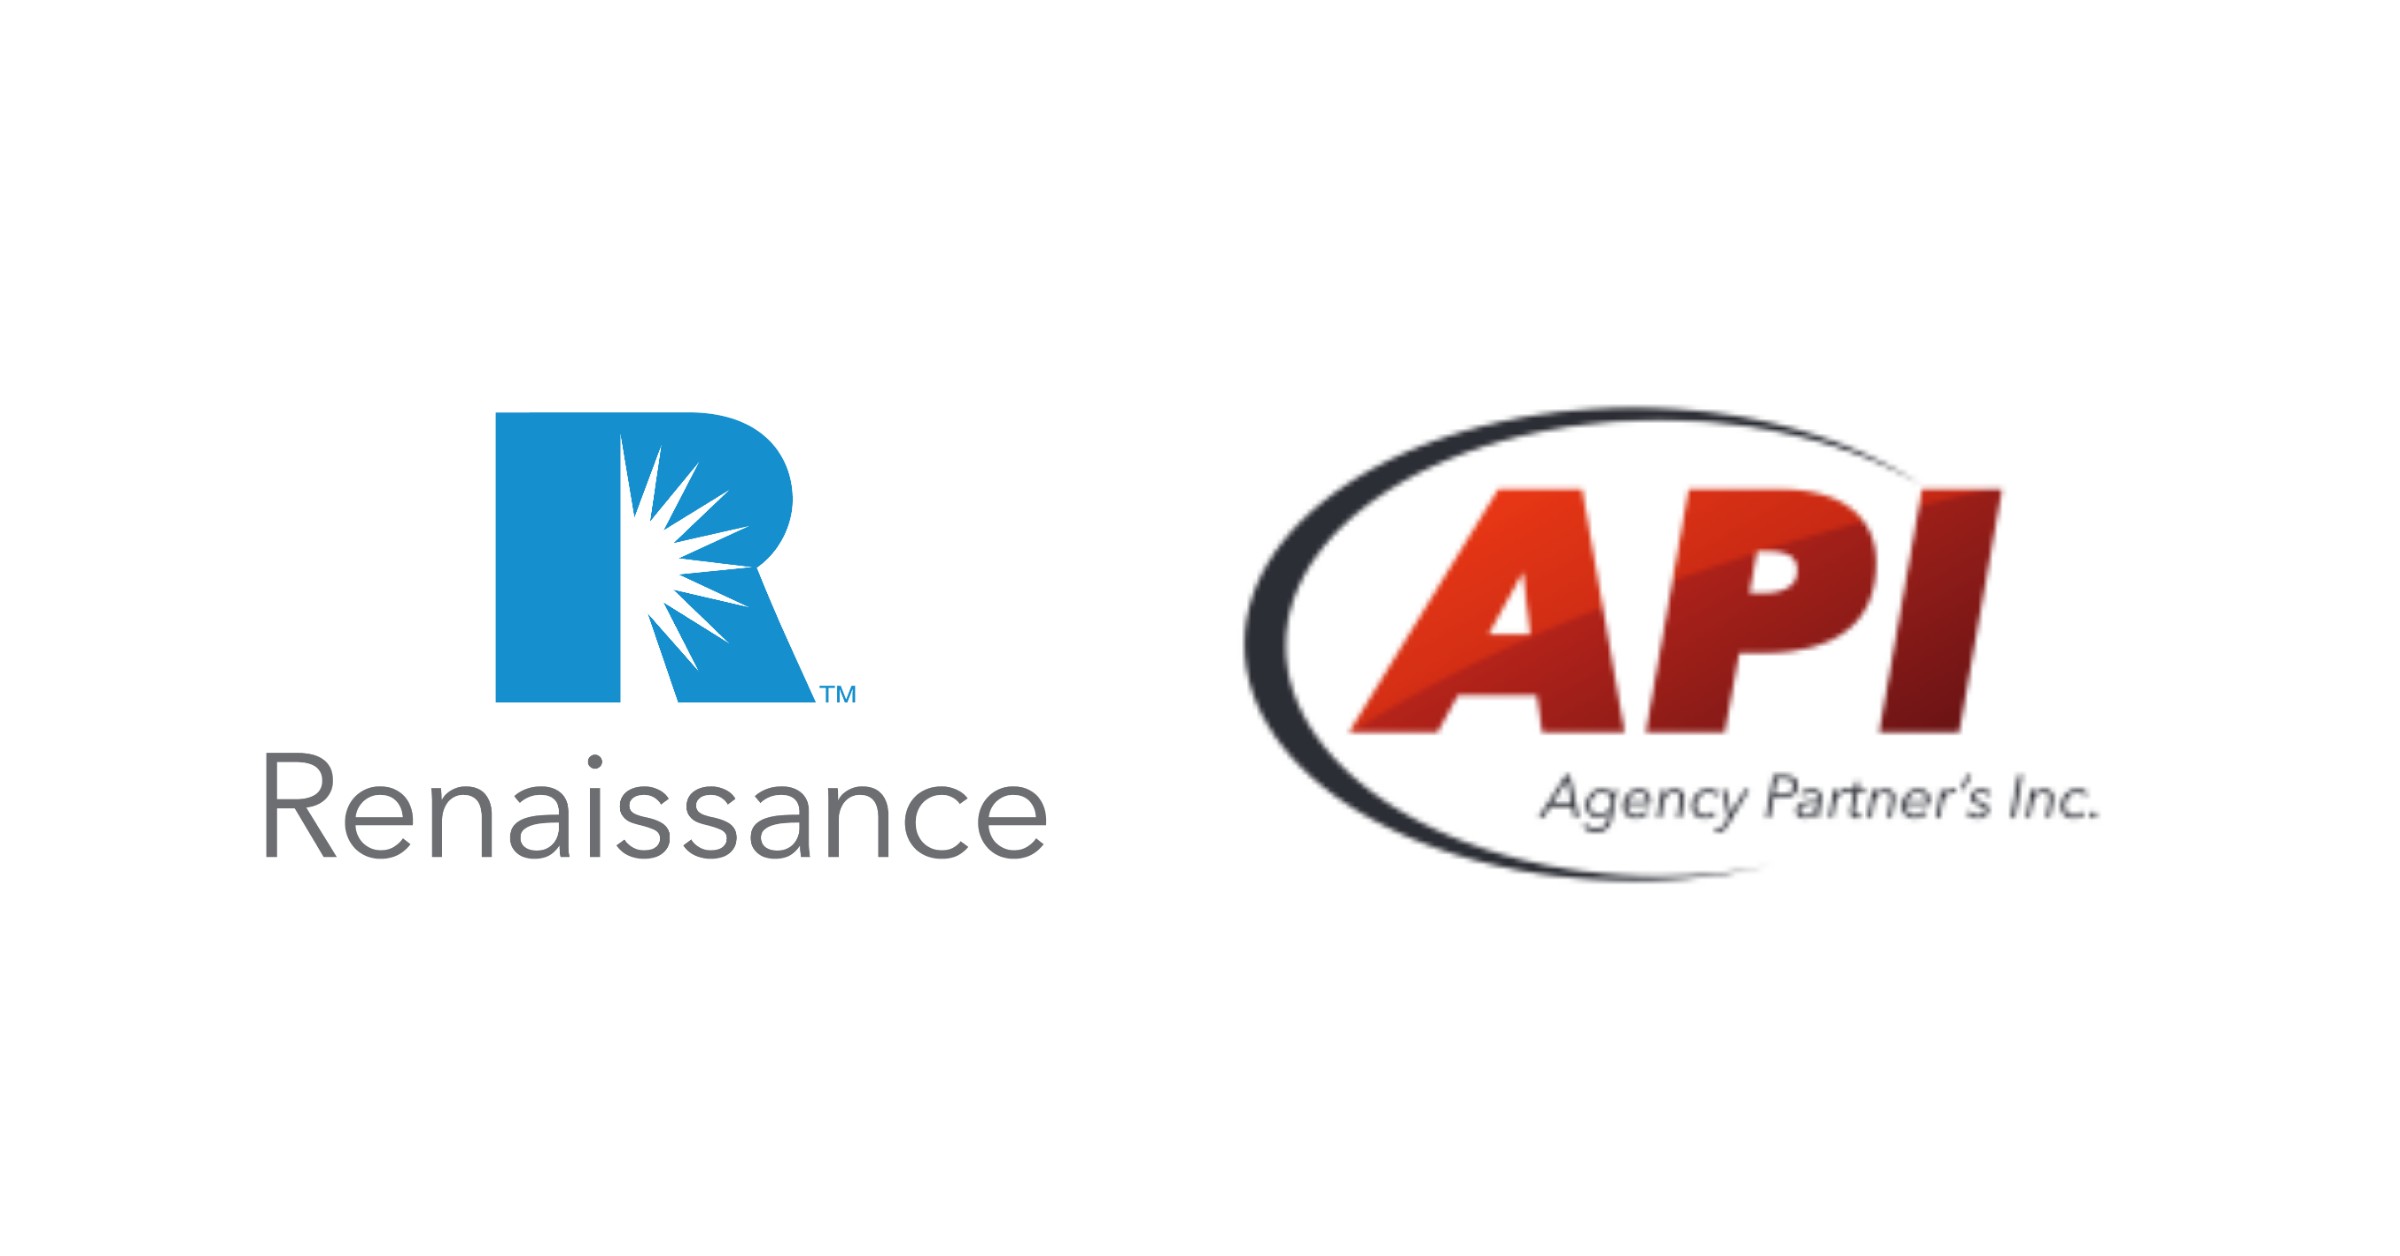 Company logos for Renaissance Alliance and Agency Partners Incorporated.